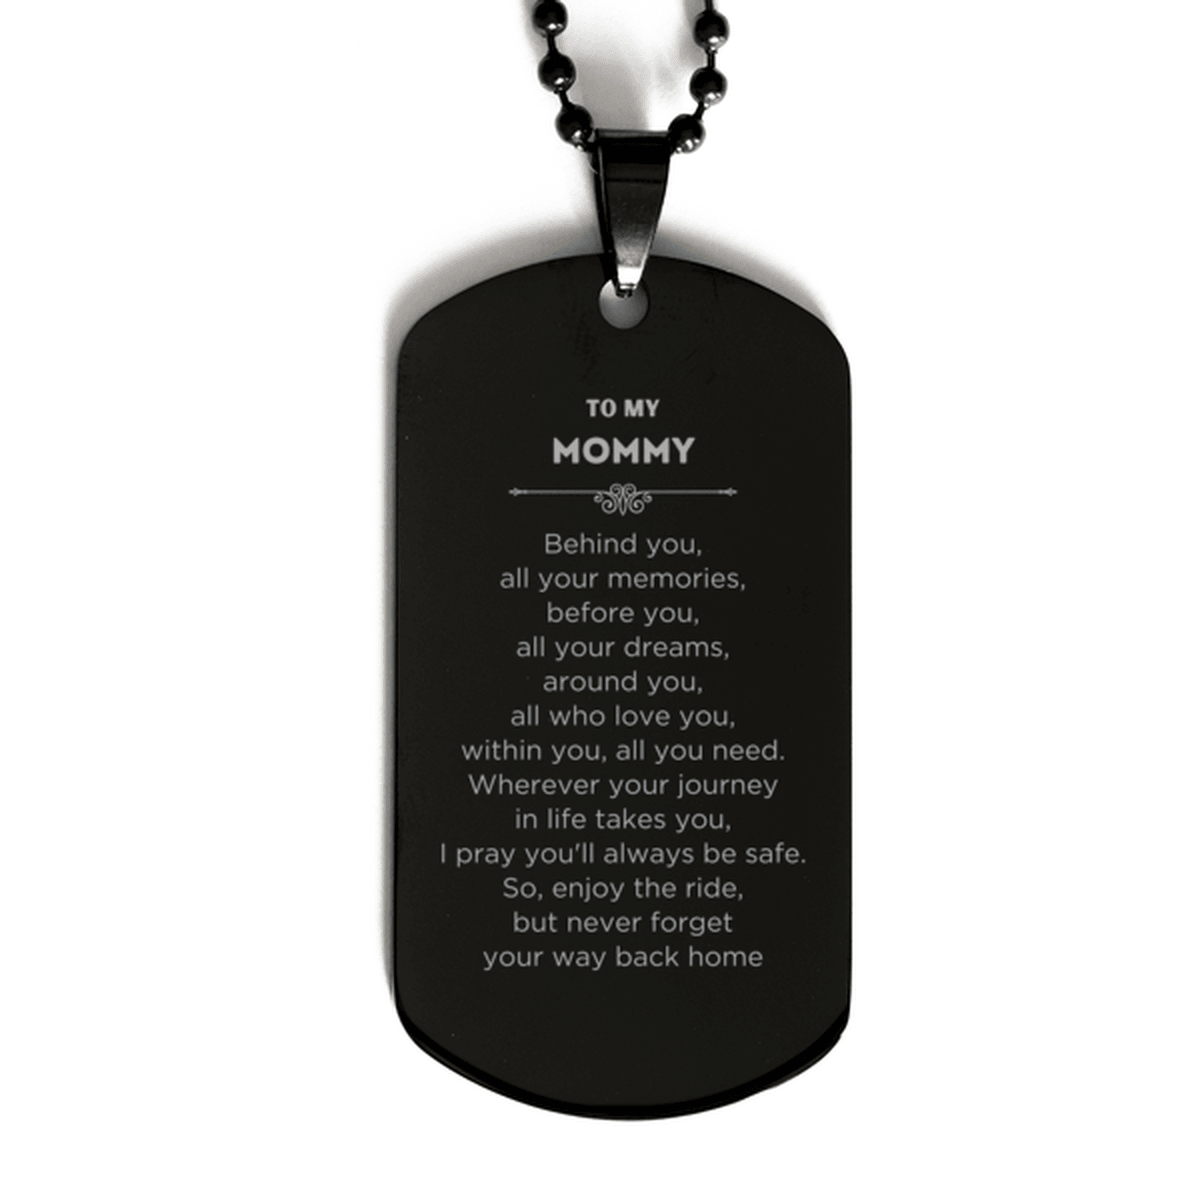 To My Mommy Gifts, Inspirational Mommy Black Dog Tag, Sentimental Birthday Christmas Unique Gifts For Mommy Behind you, all your memories, before you, all your dreams, around you, all who love you, within you, all you need - Mallard Moon Gift Shop